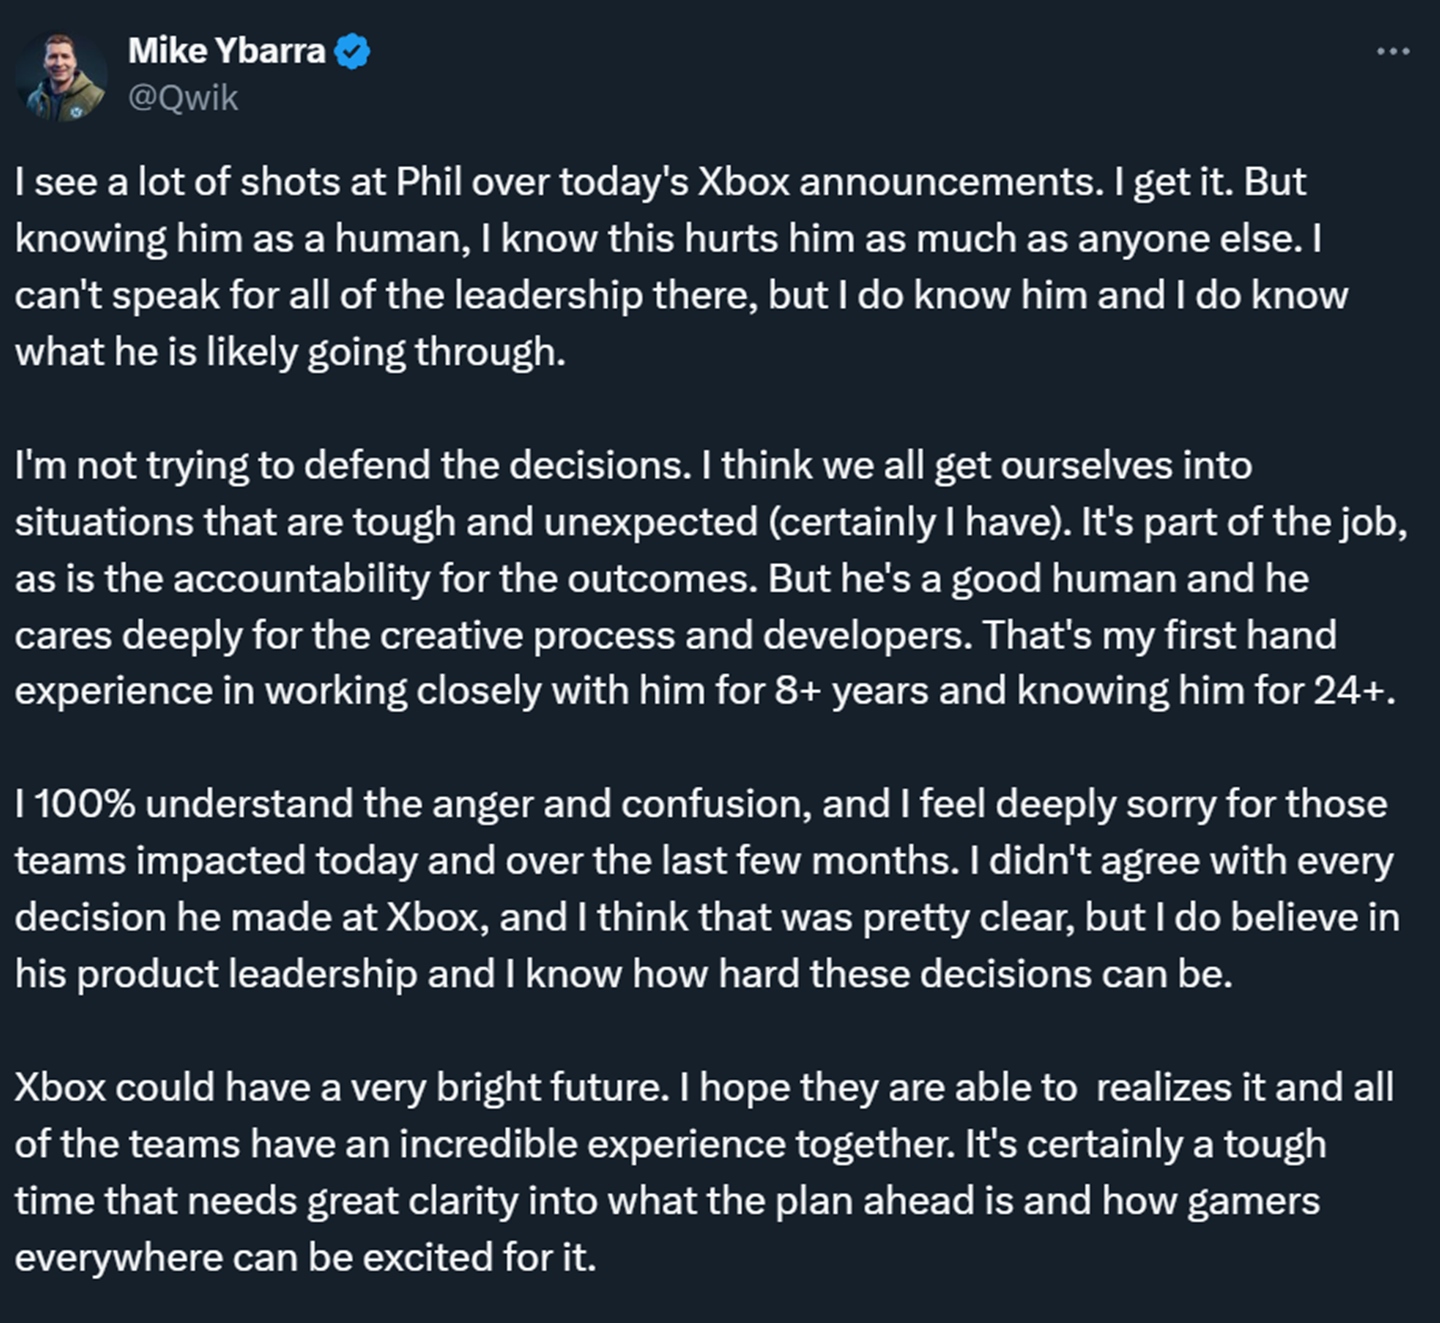 Publication by Mike Ybarra, former CEO of Blizzard, in defense of Phil Spencer at X.